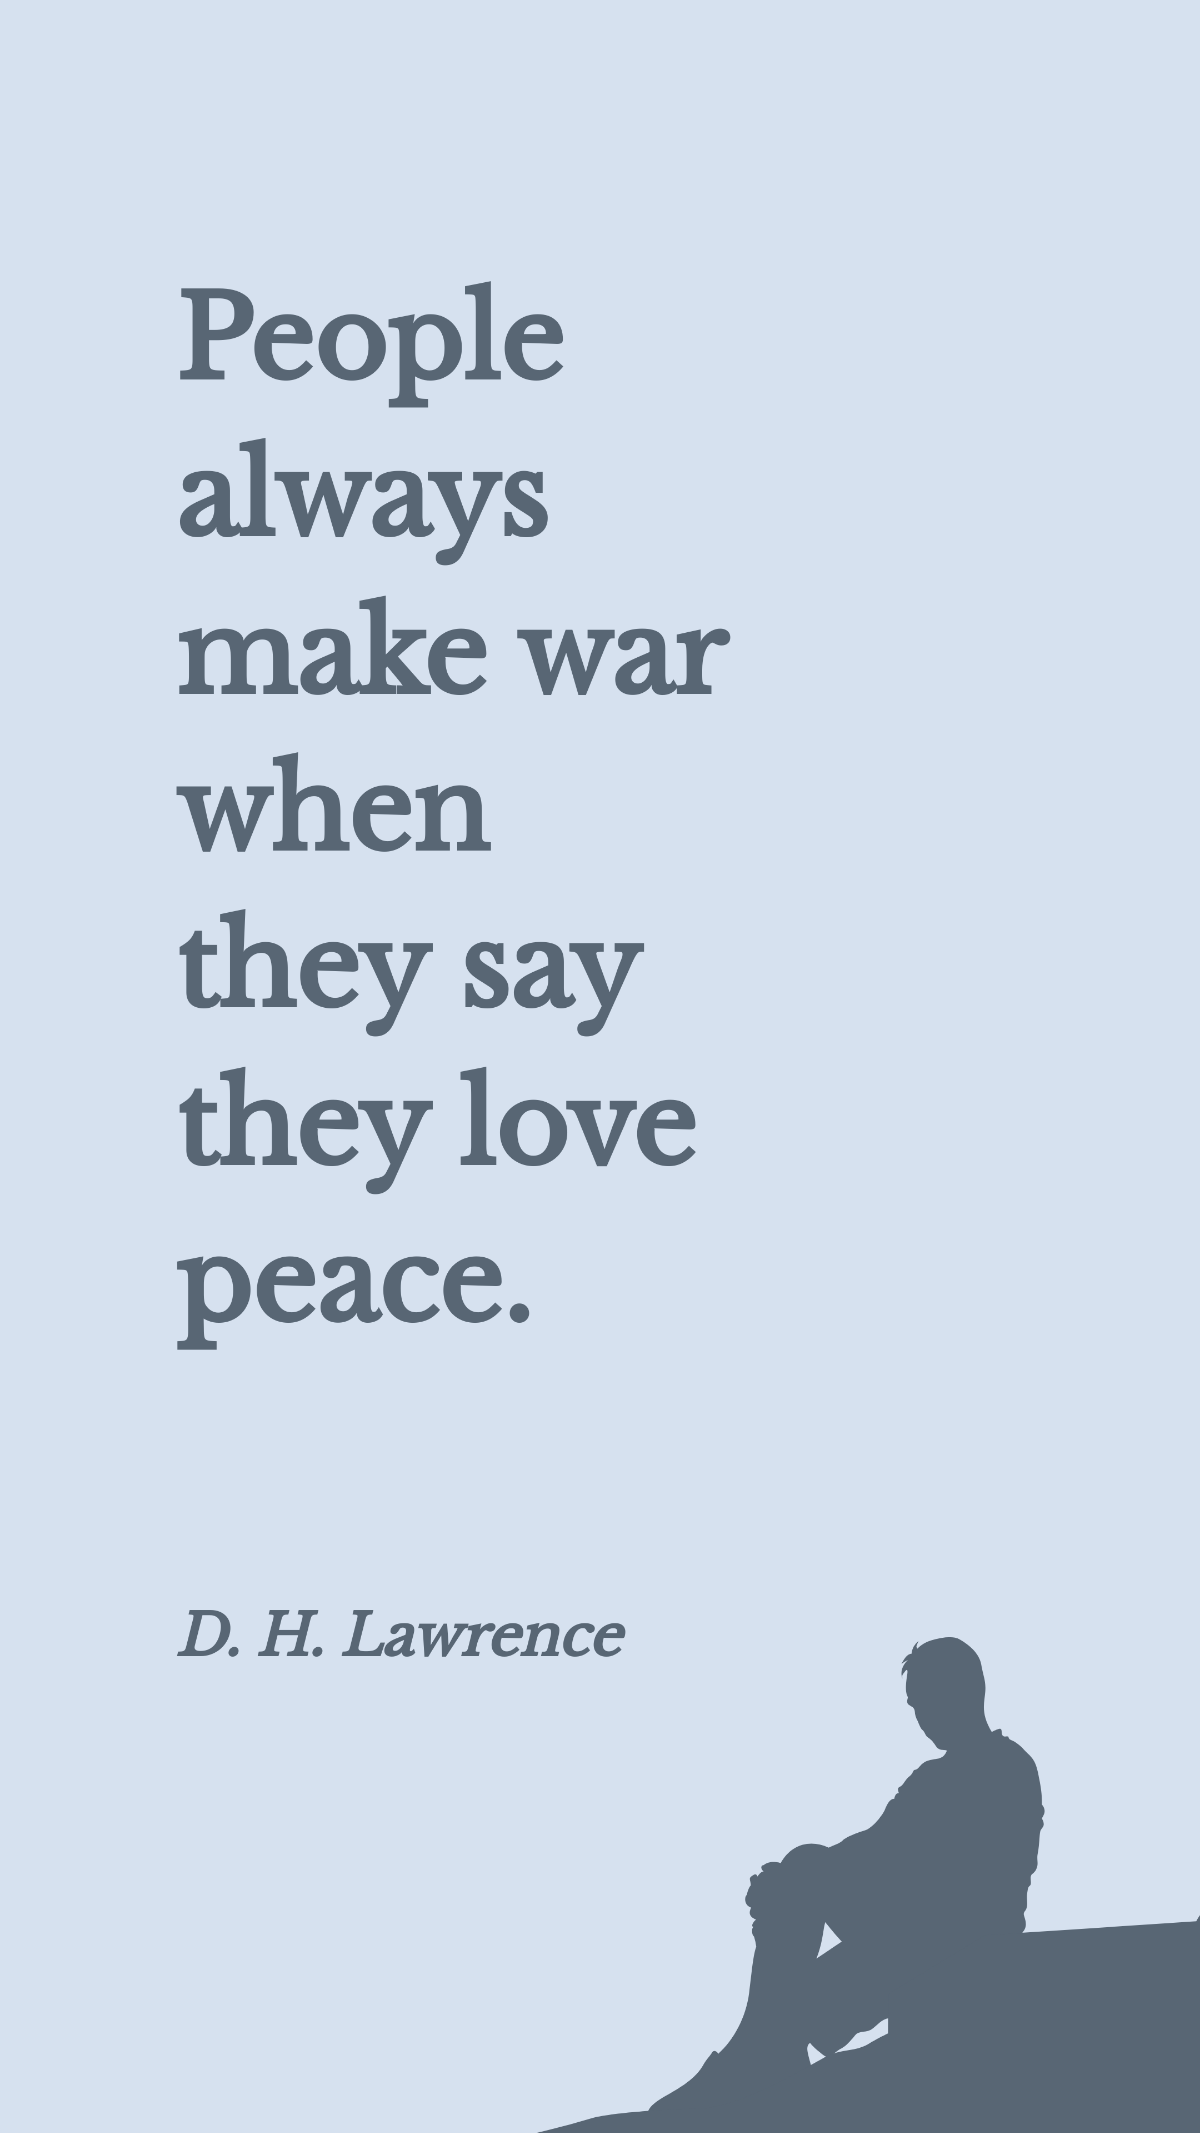 D. H. Lawrence - People always make war when they say they love peace. Template